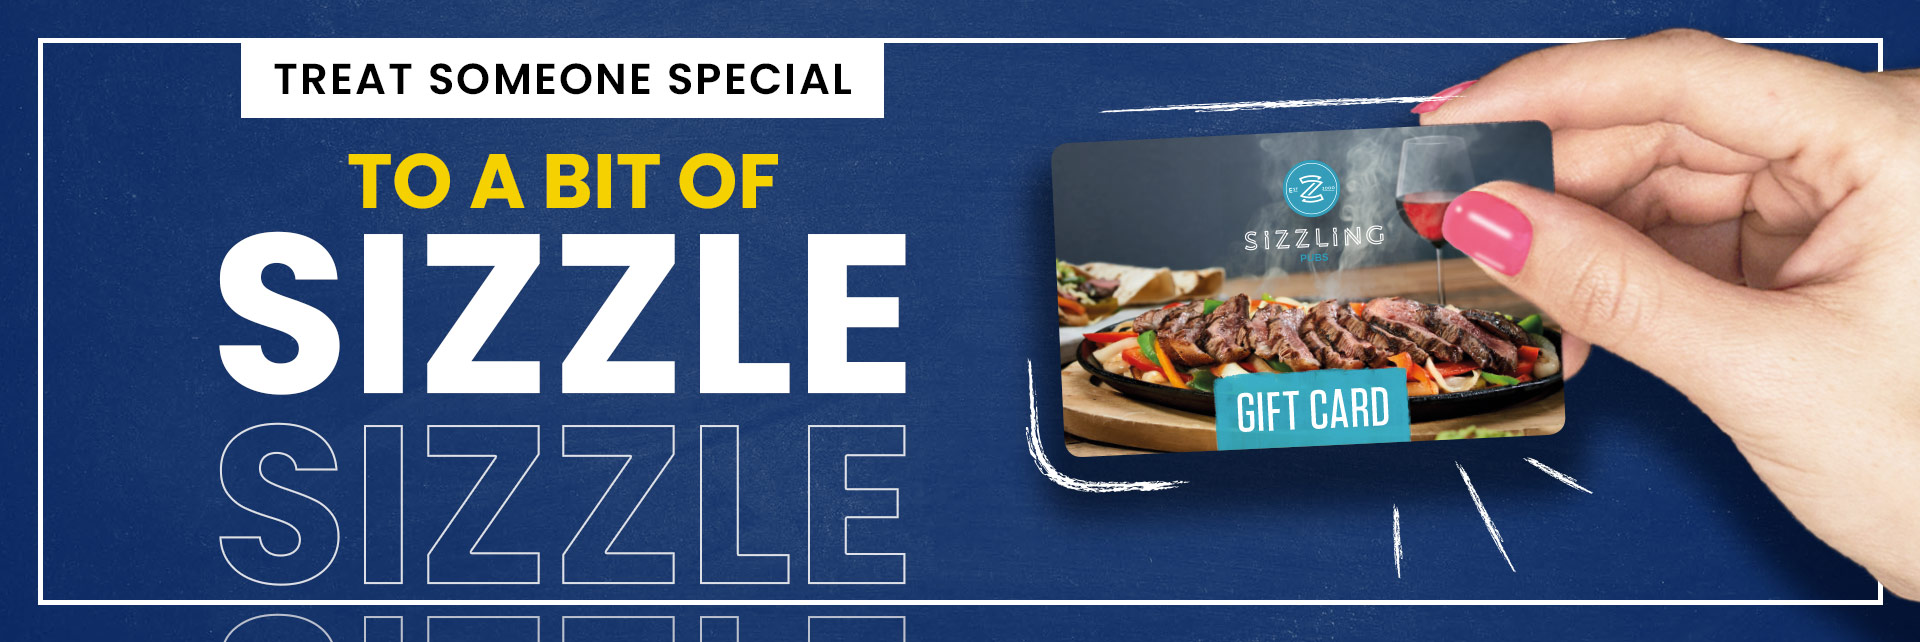 Sizzling Pubs Gift Card at Stag Inn in Wigan